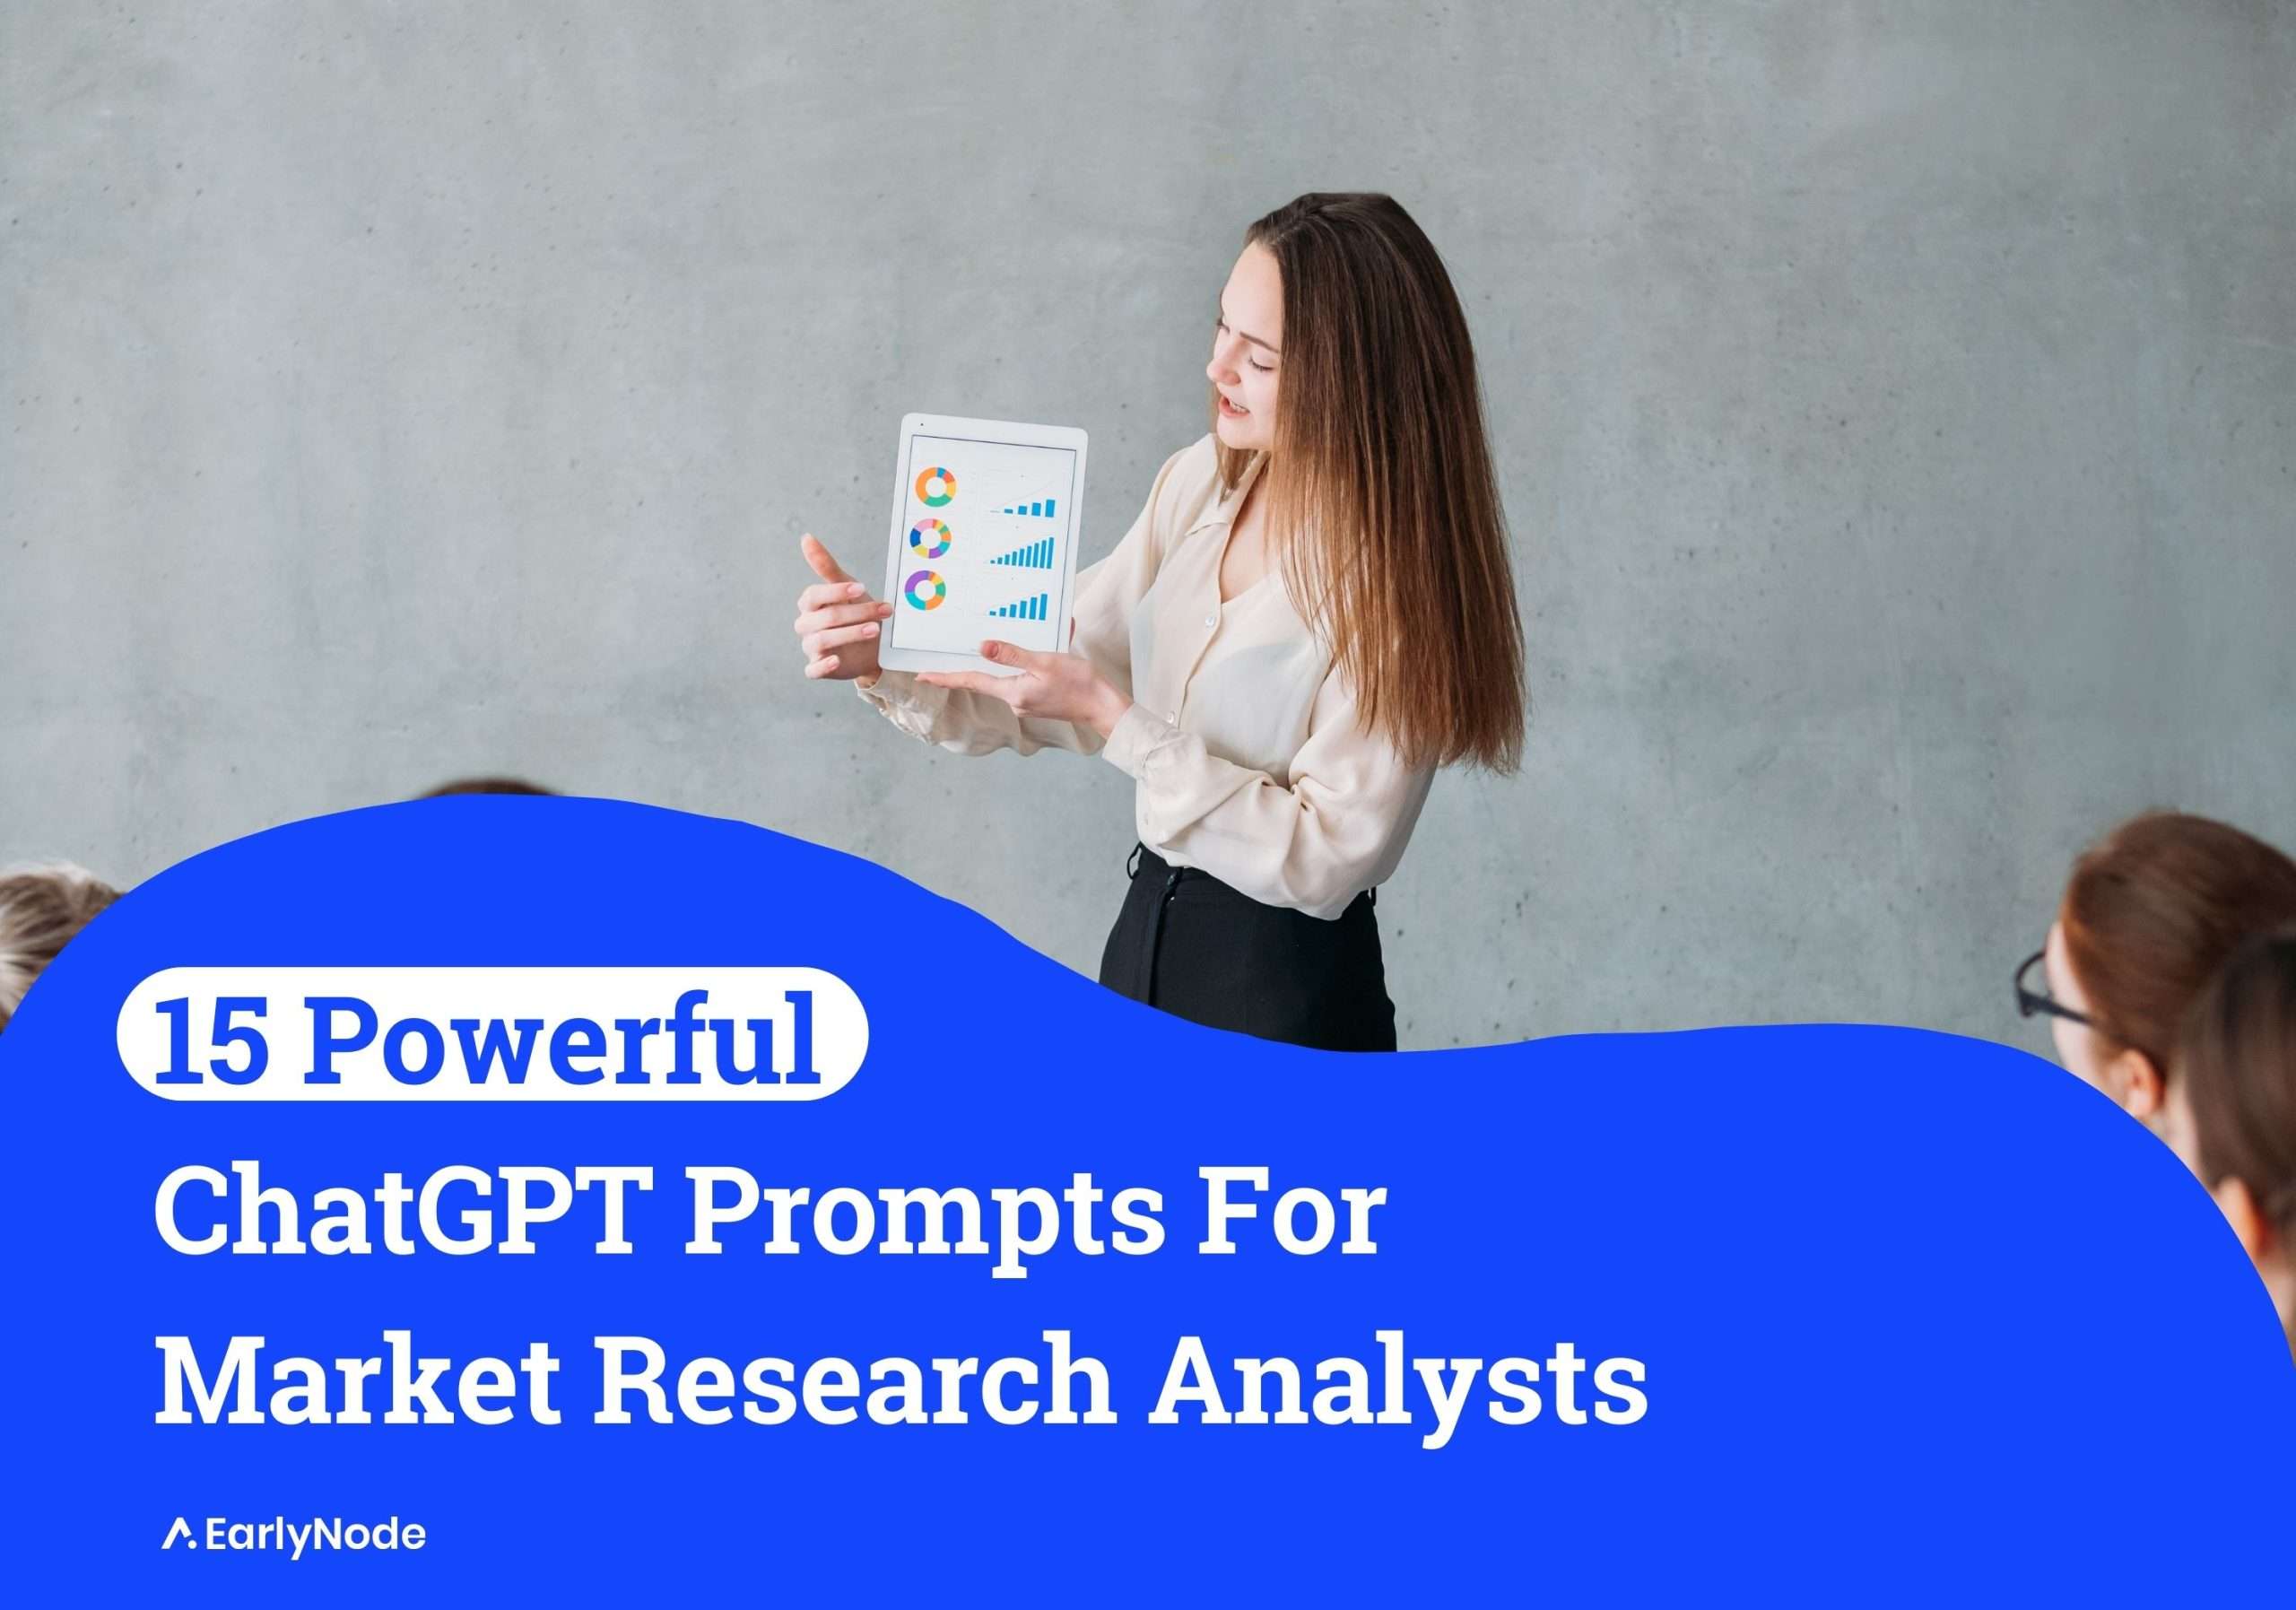 15+ Powerful ChatGPT Prompts for Market Research Analysts